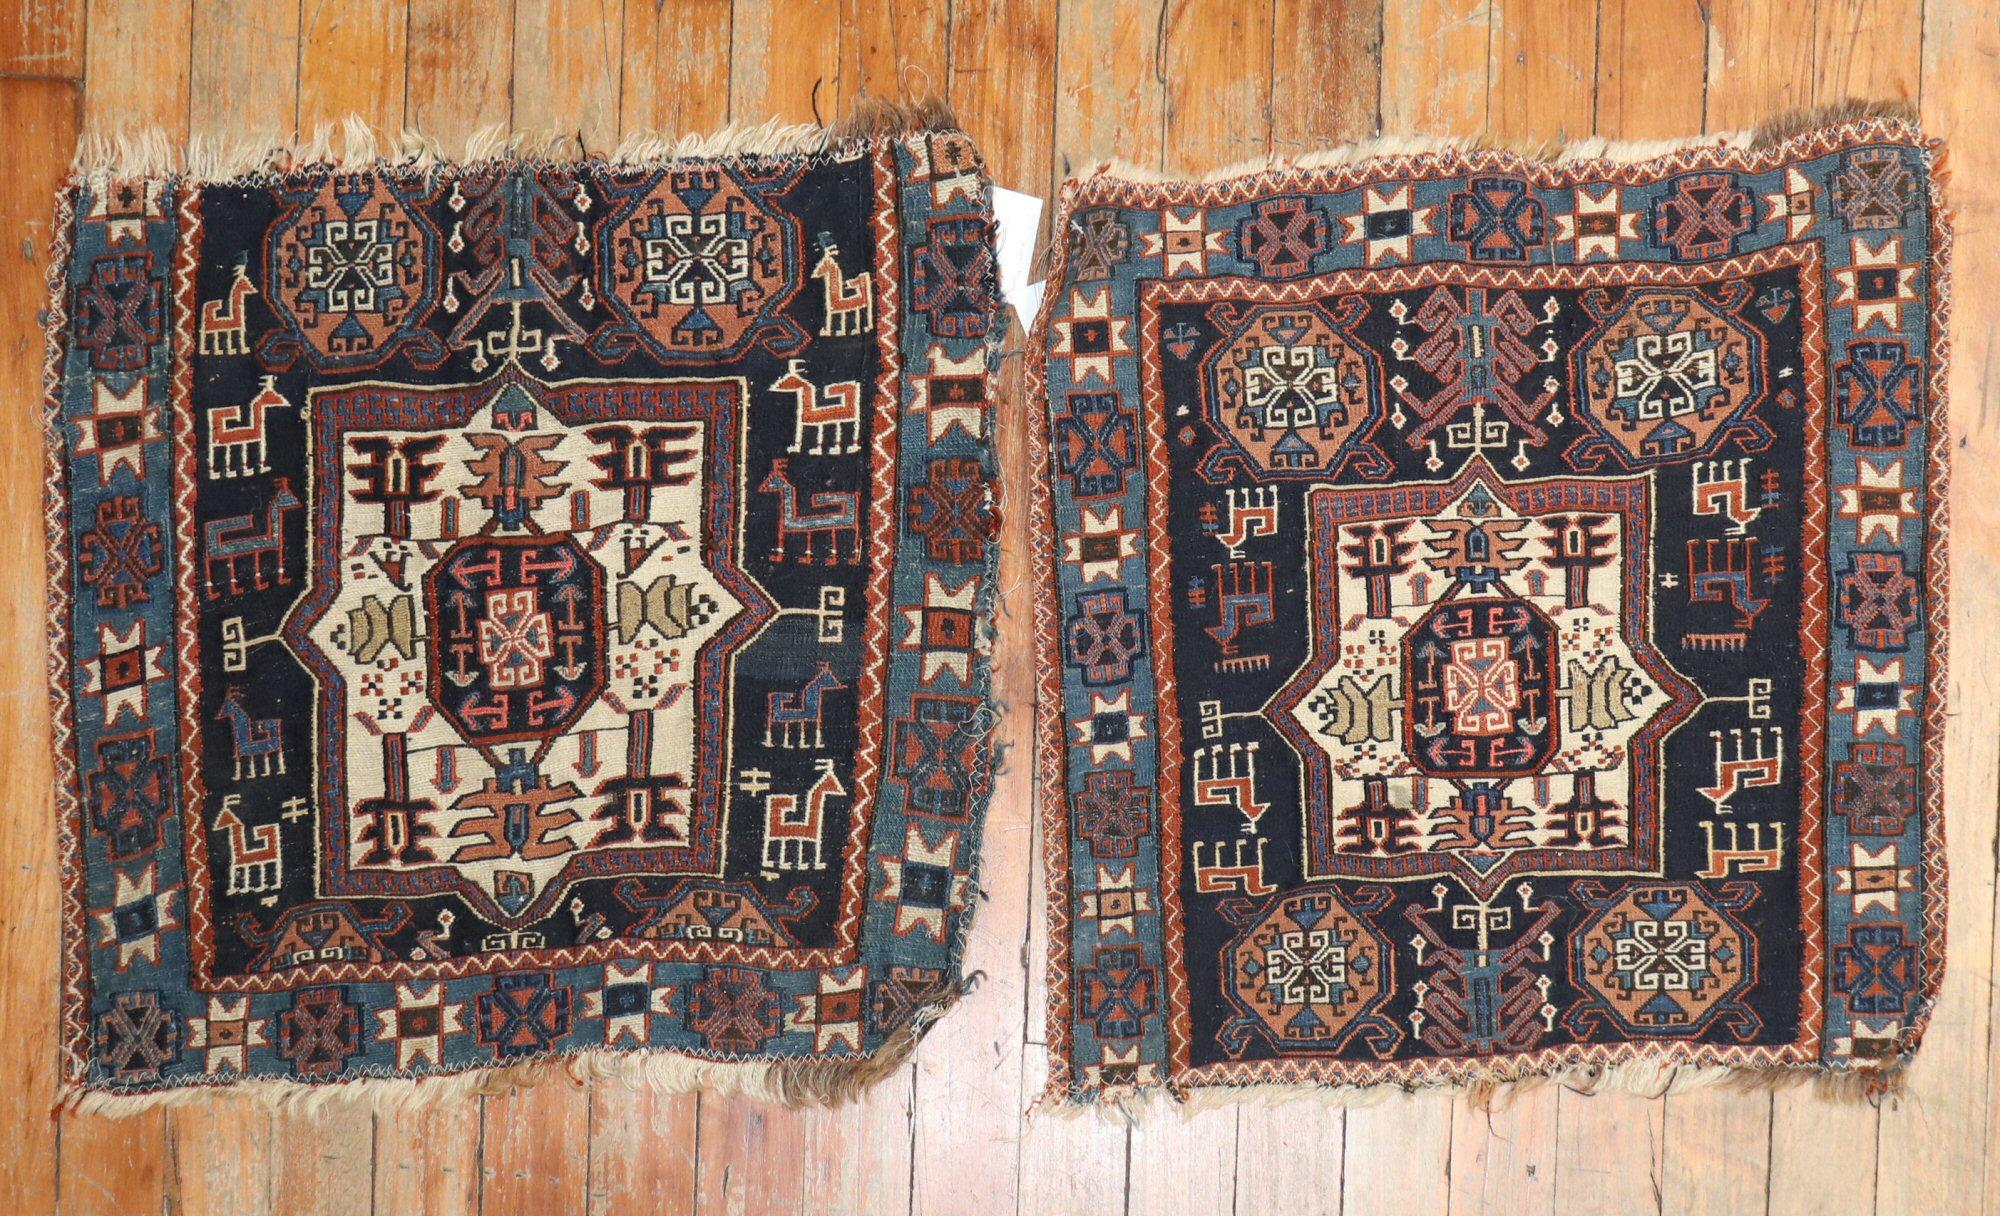 Pair of 19th-century Persian bag face textile rugs

each measuring: 1'6'' x 1'8''.